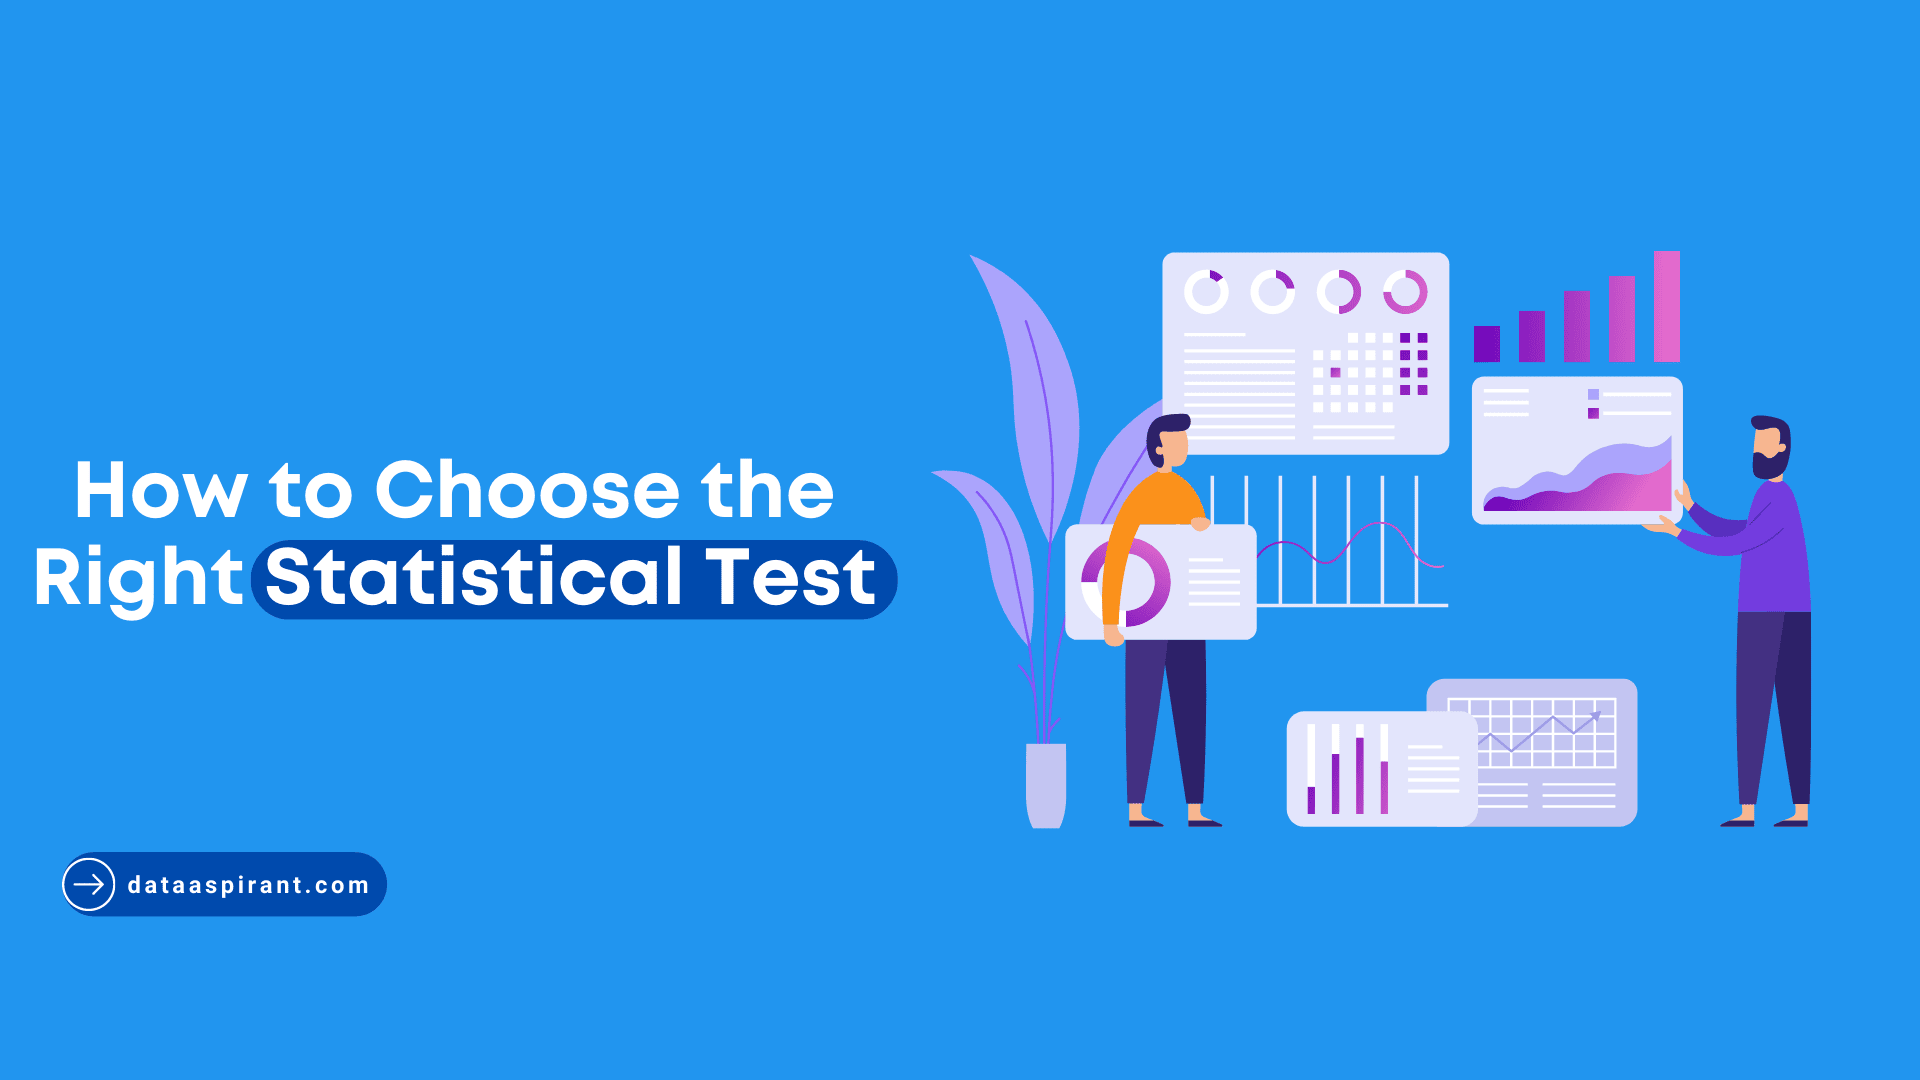 How to Choose the Right Statistical Test